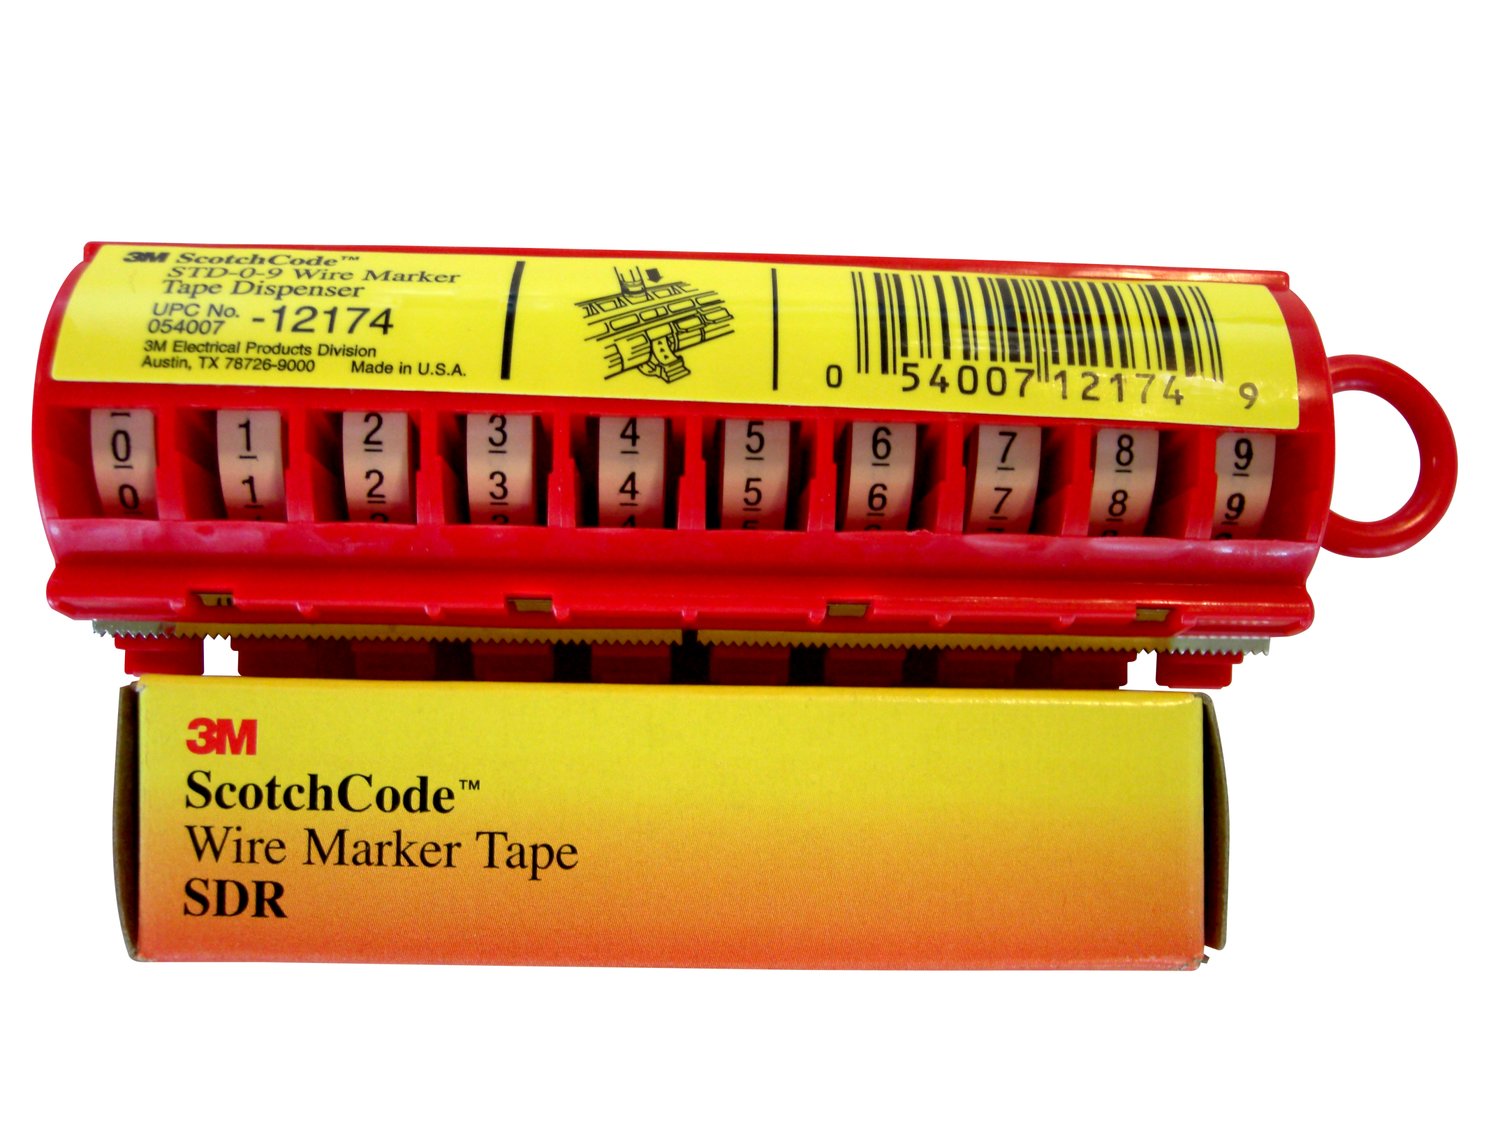 7100165053 - 3M Wire Marker Tape Numbers SDR 70-79, 50 Rolls/Case